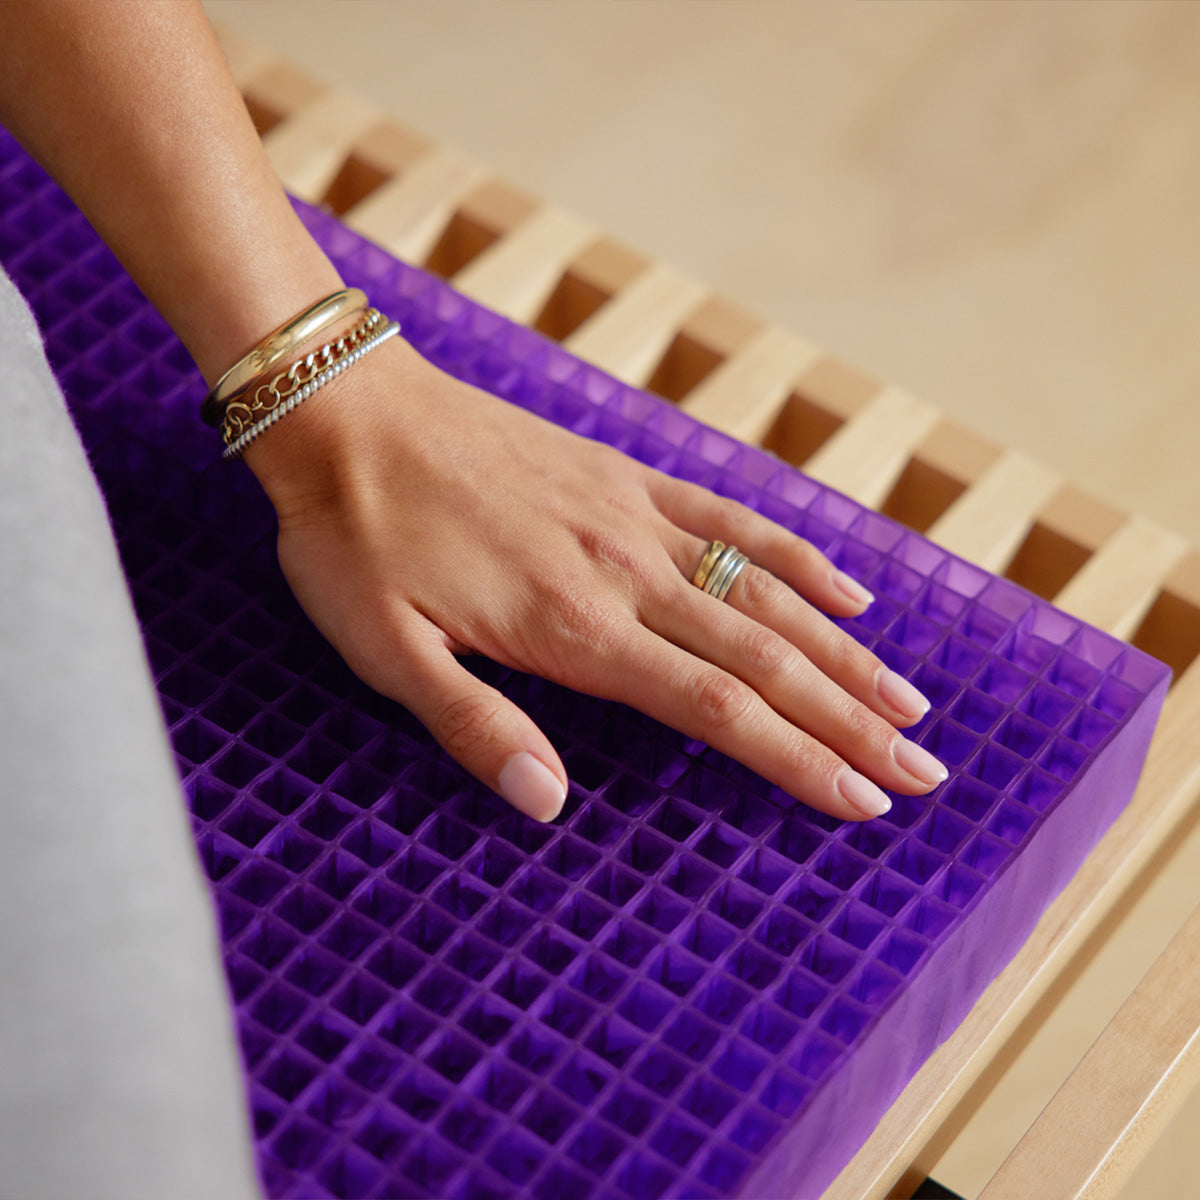 Hand Touching The Purple Grid Used In The Purple Double Seat Cushion